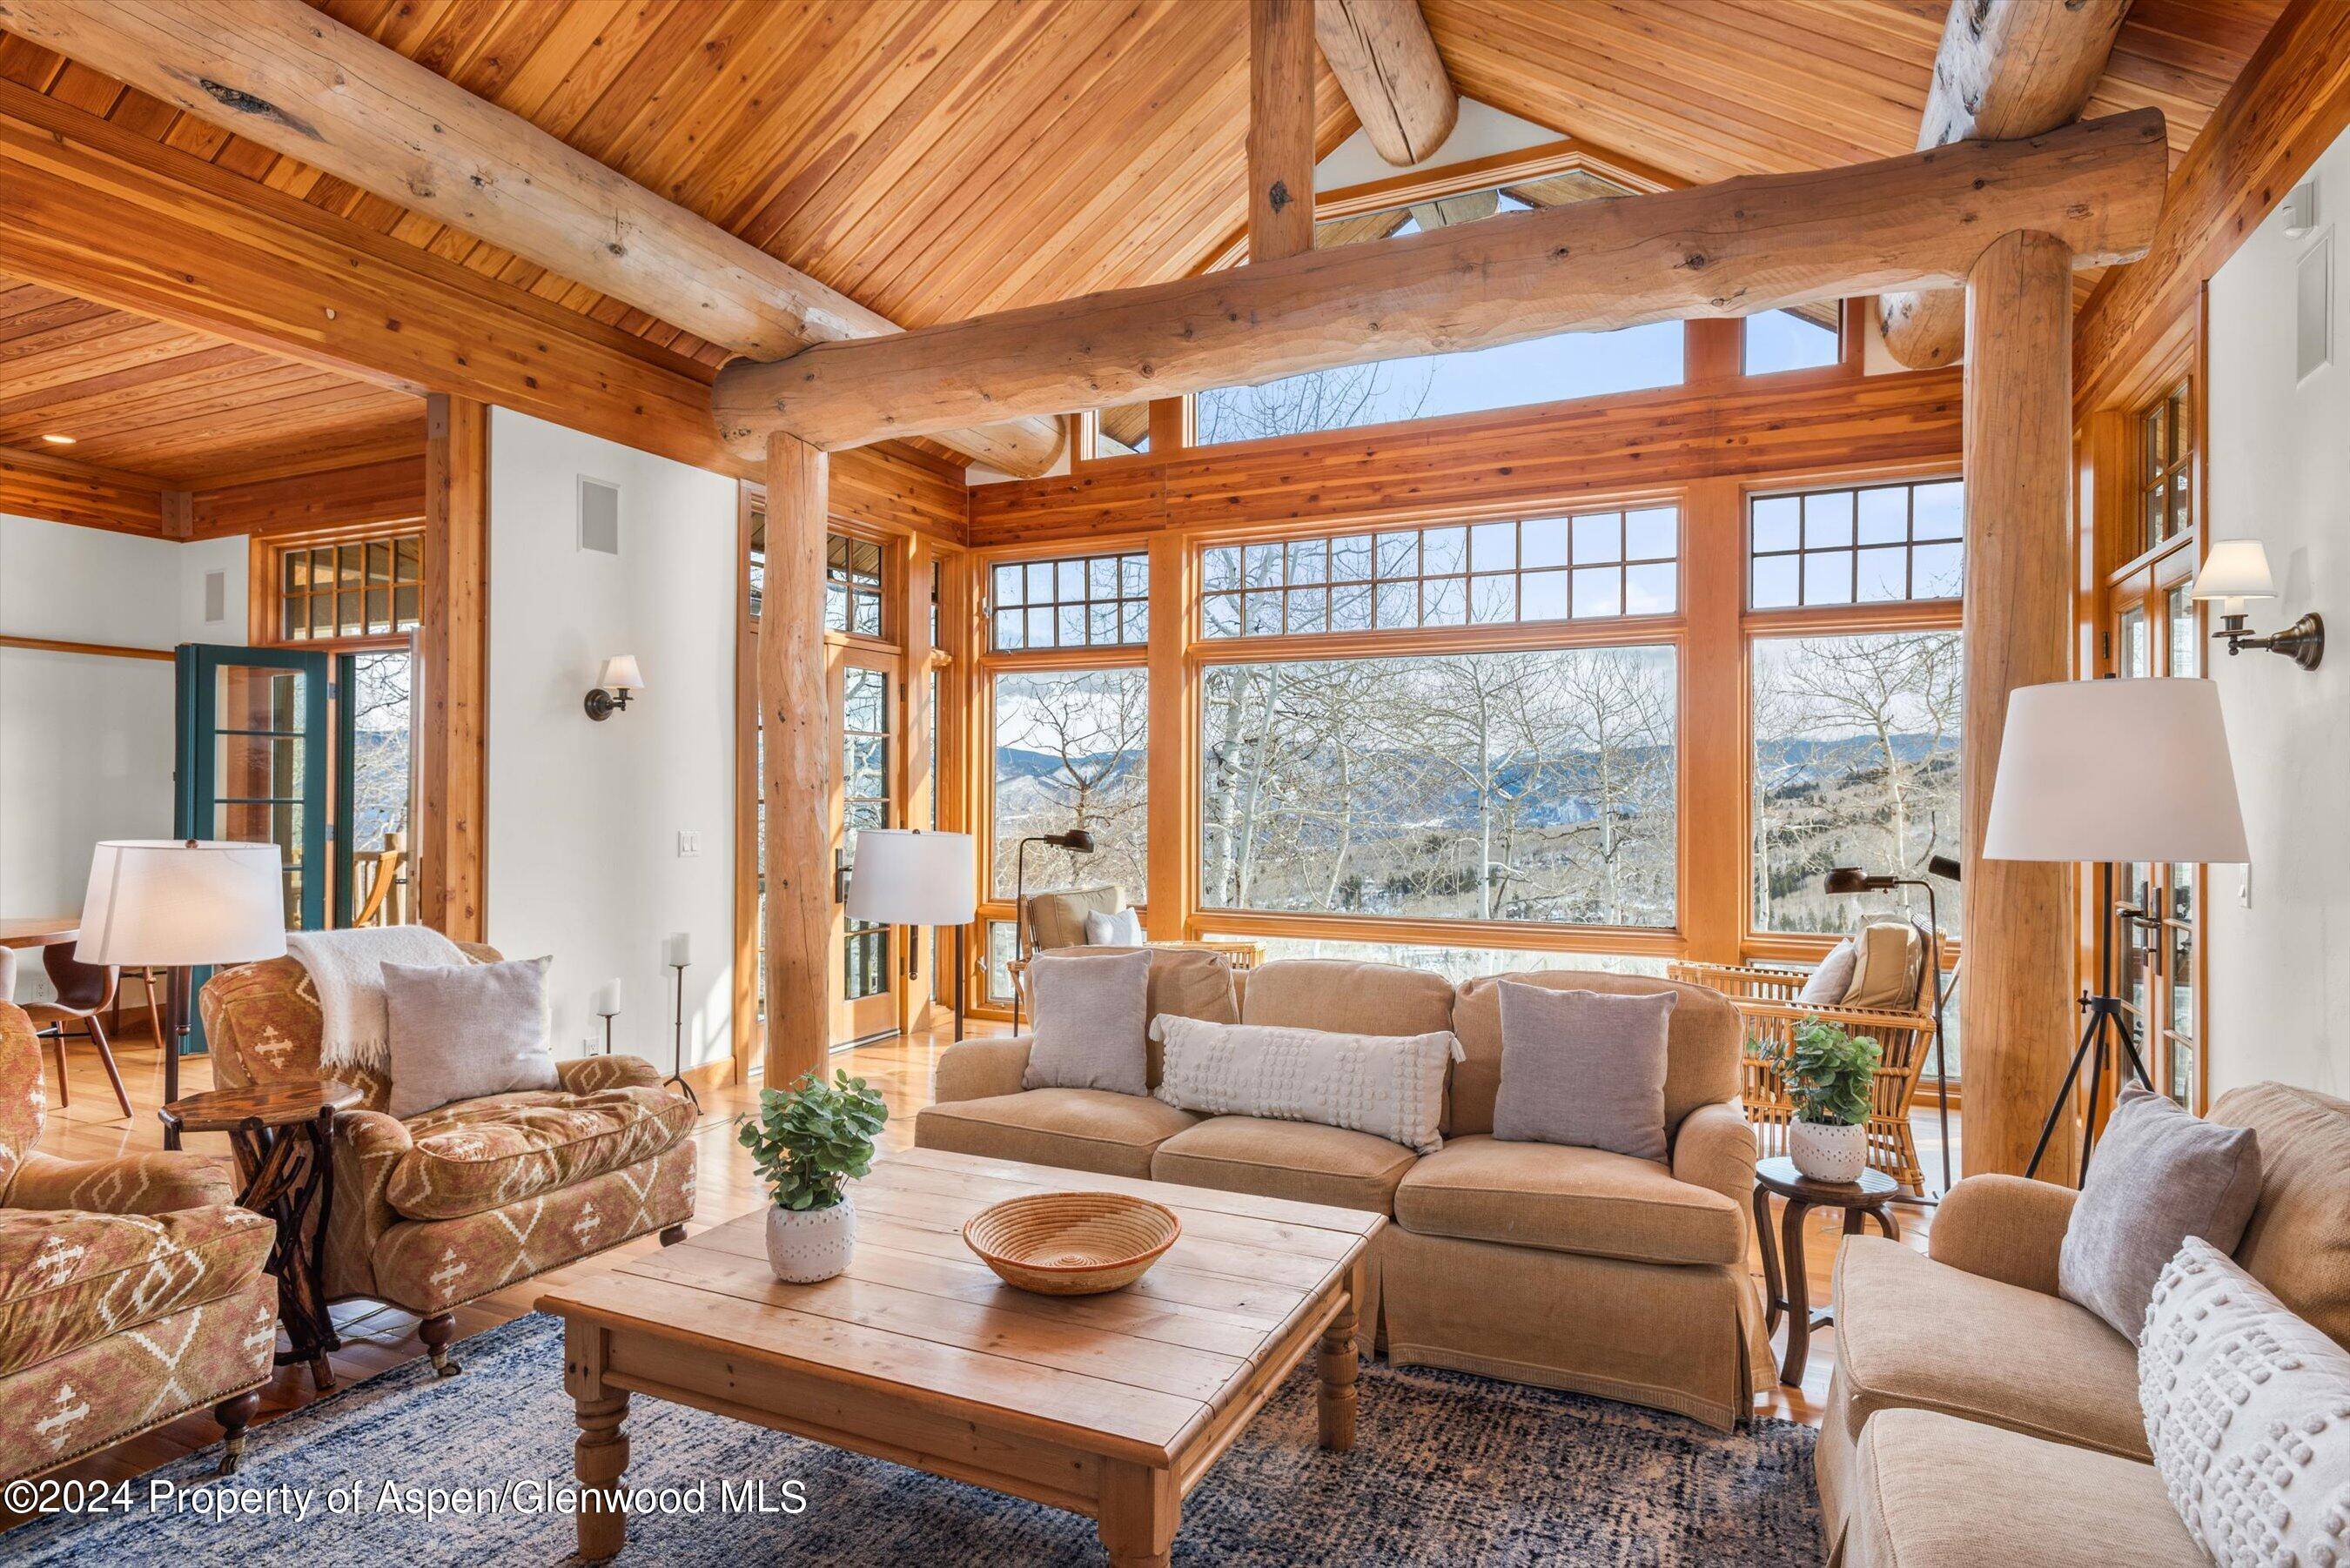 Classic mountain home in Snowmass Village with views, privacy, and space for everyone.